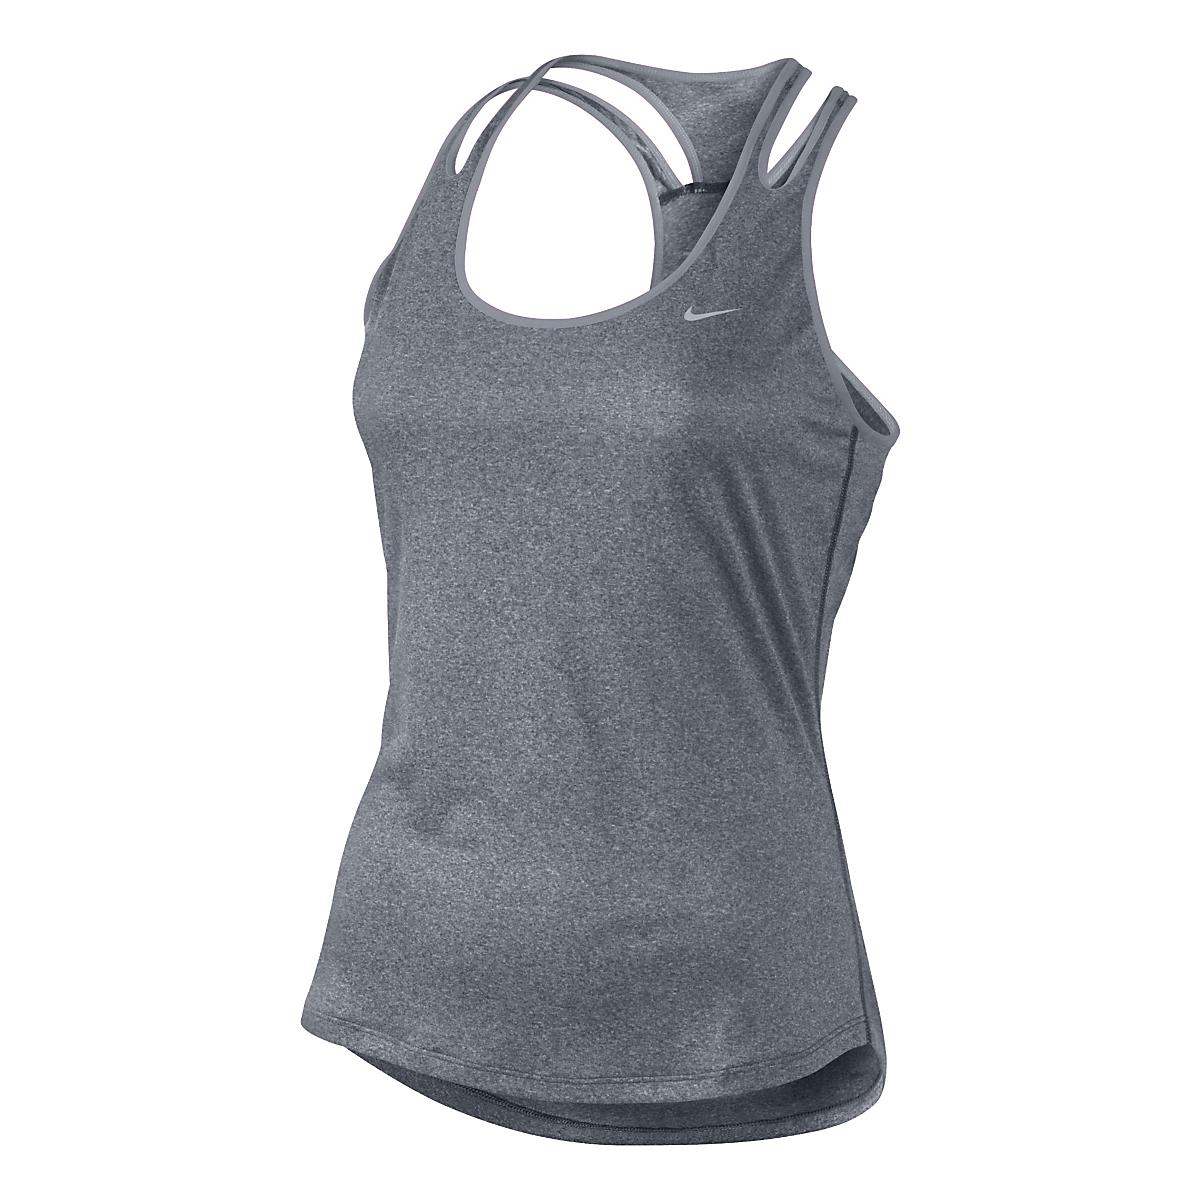 Womens Nike Relay Tank Technical Tops at Road Runner Sports